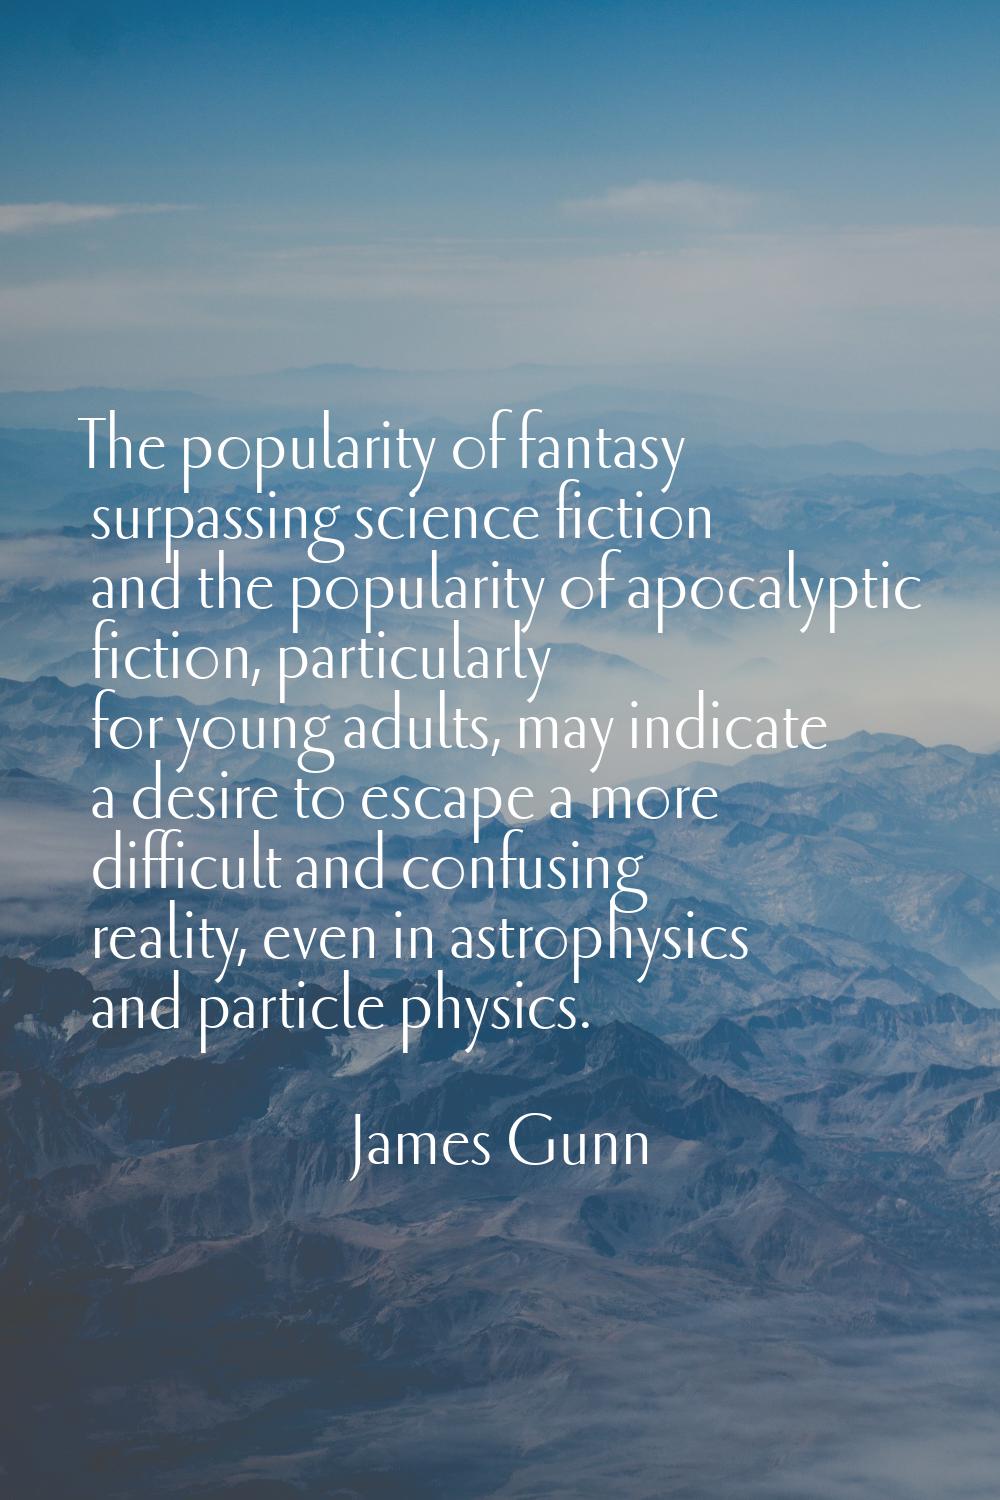 The popularity of fantasy surpassing science fiction and the popularity of apocalyptic fiction, par